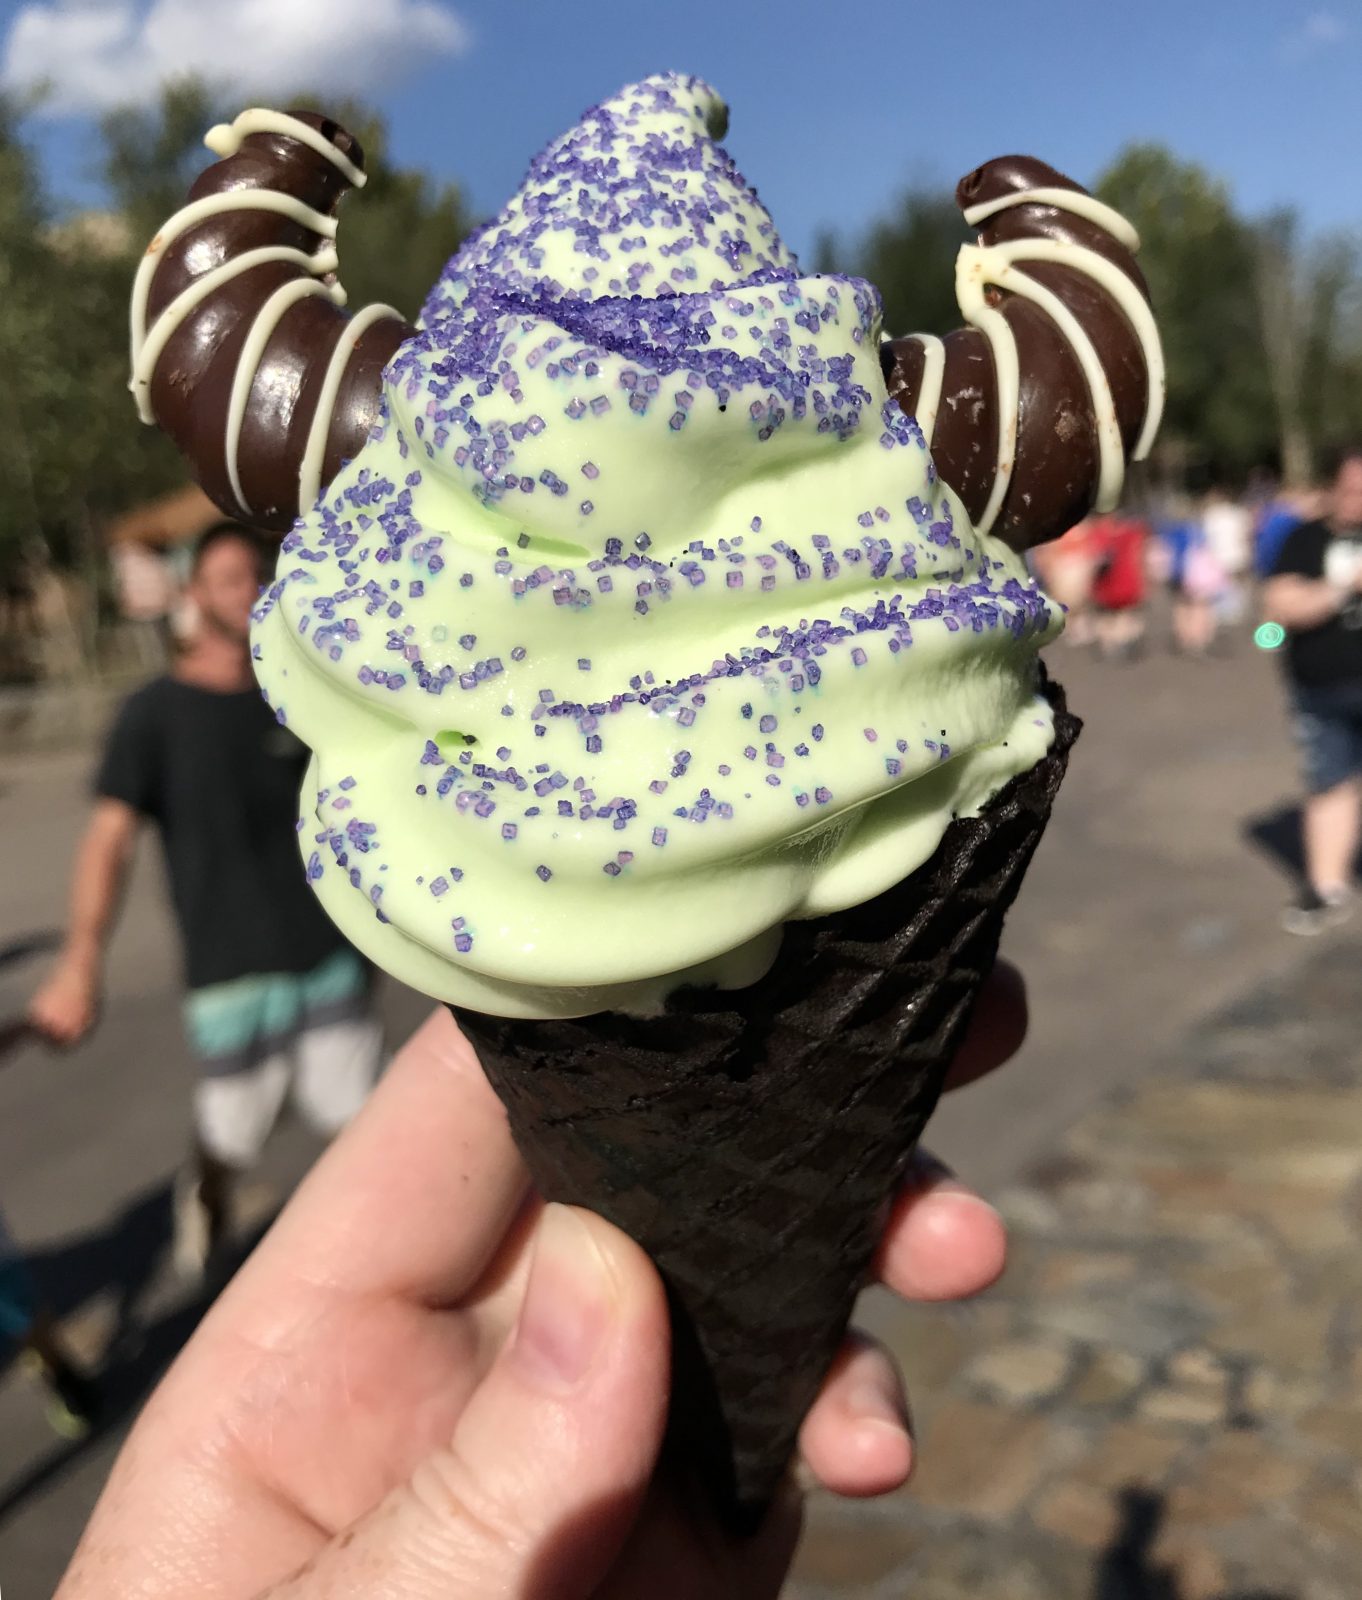 Malificent themed ice cream cone with chocolate horns and purple sprinkles